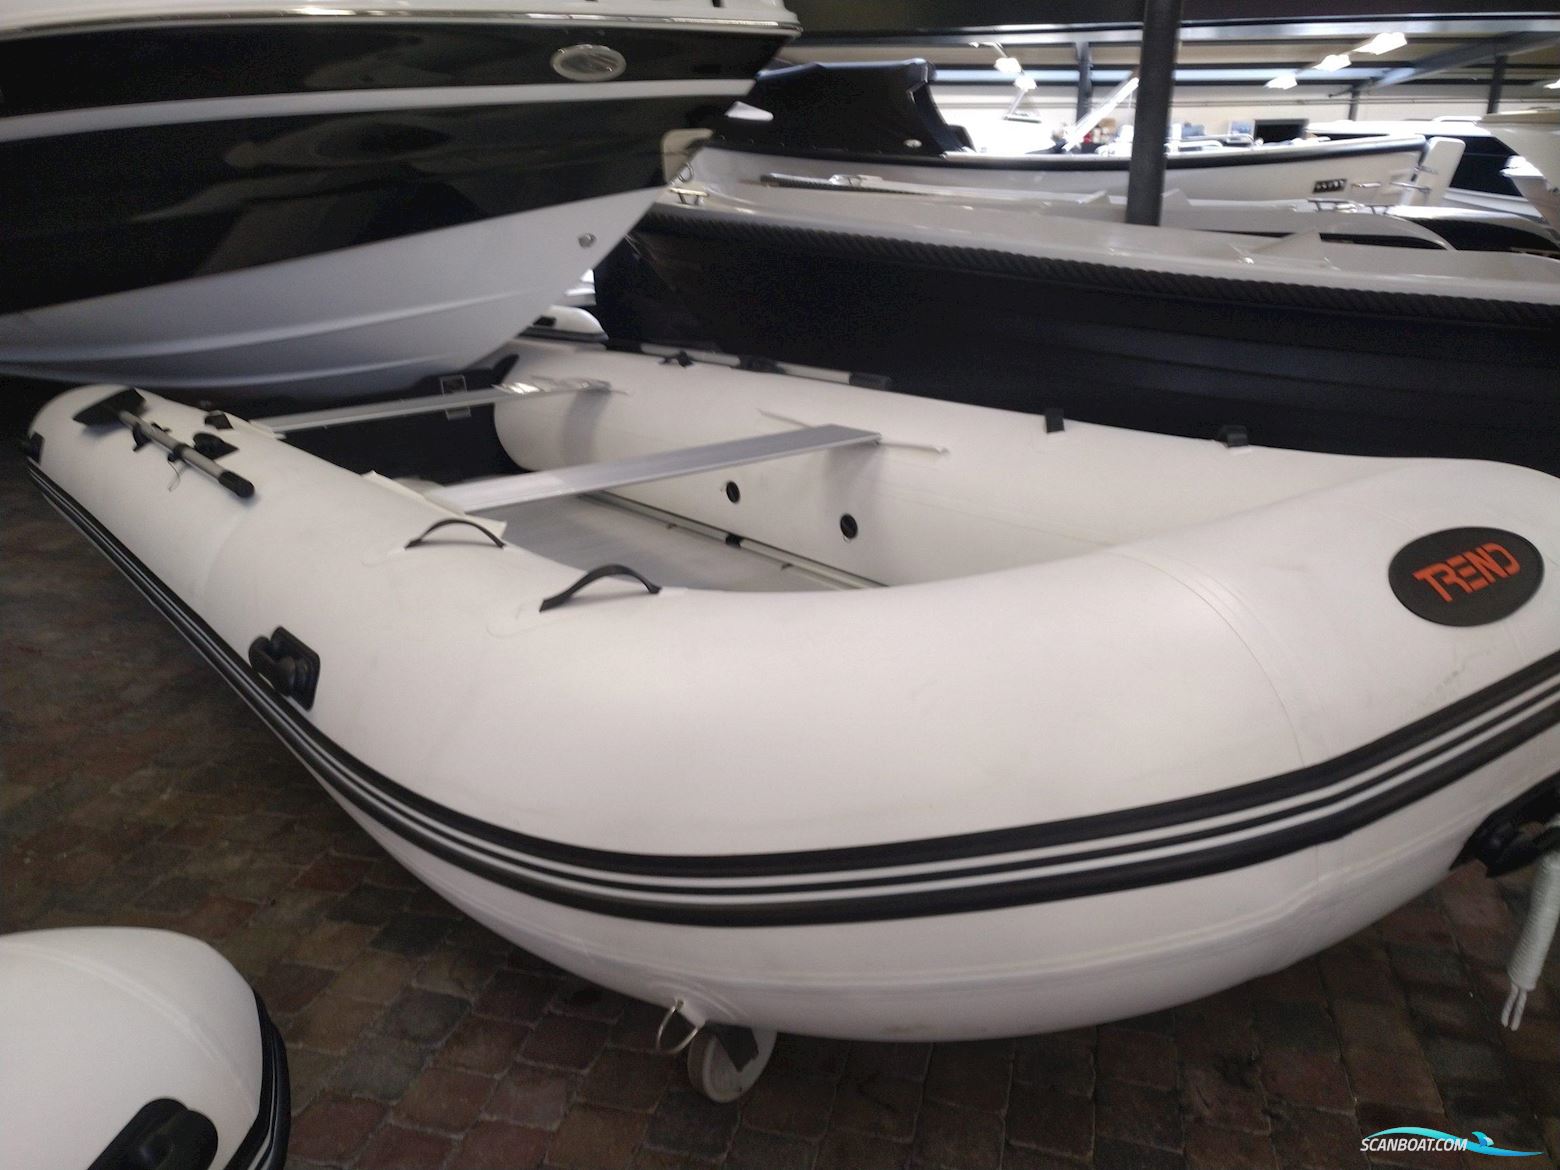 Trend 470 Alu Inflatable / Rib 2022, with Trend engine, The Netherlands